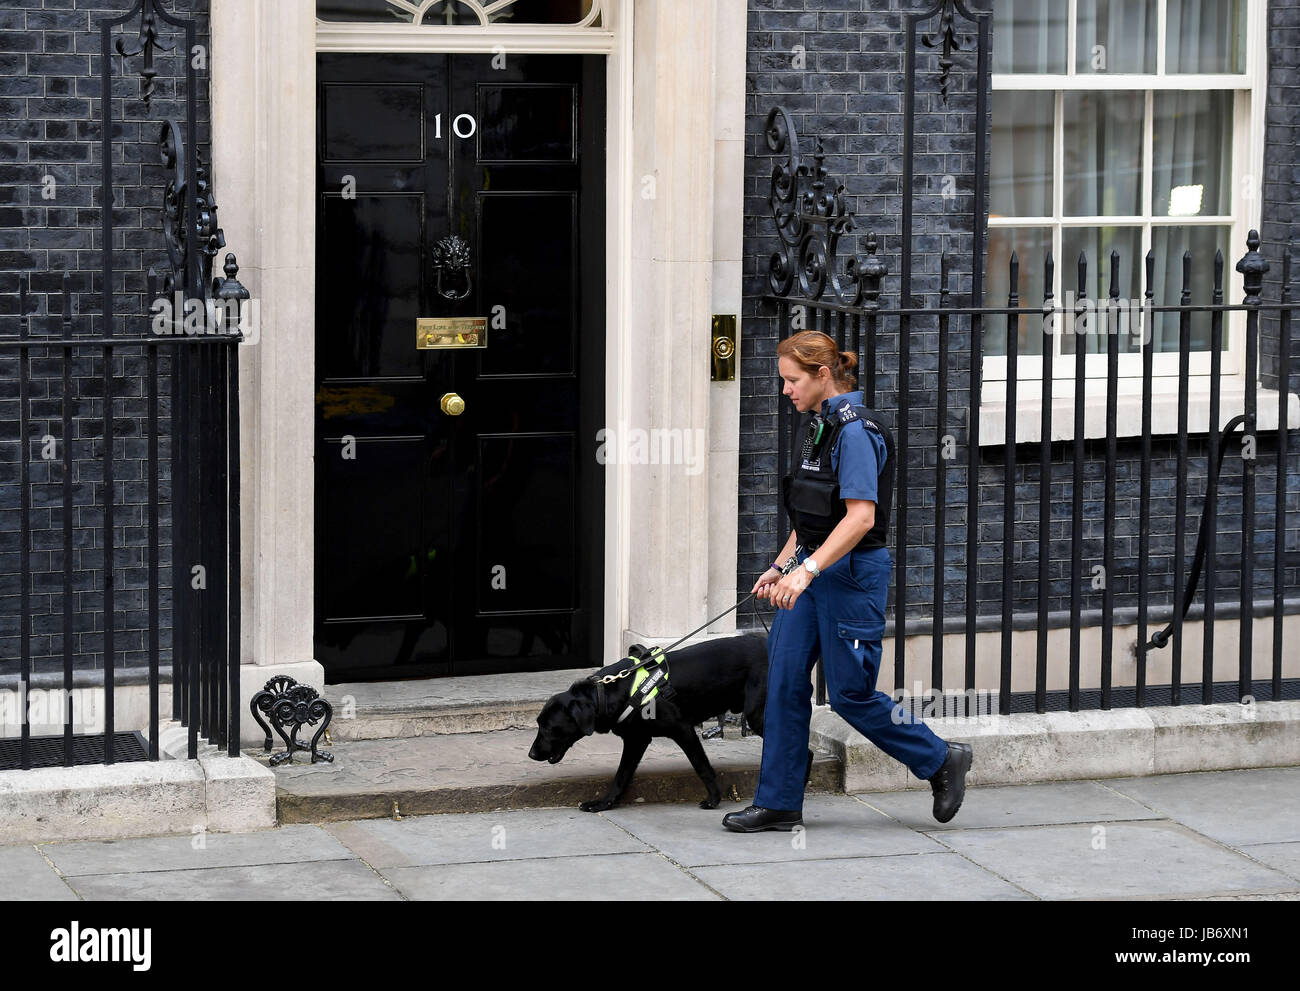 Police patrolling at Number 10 Downing Street, London, UK. Security at Downing St Stock Photo